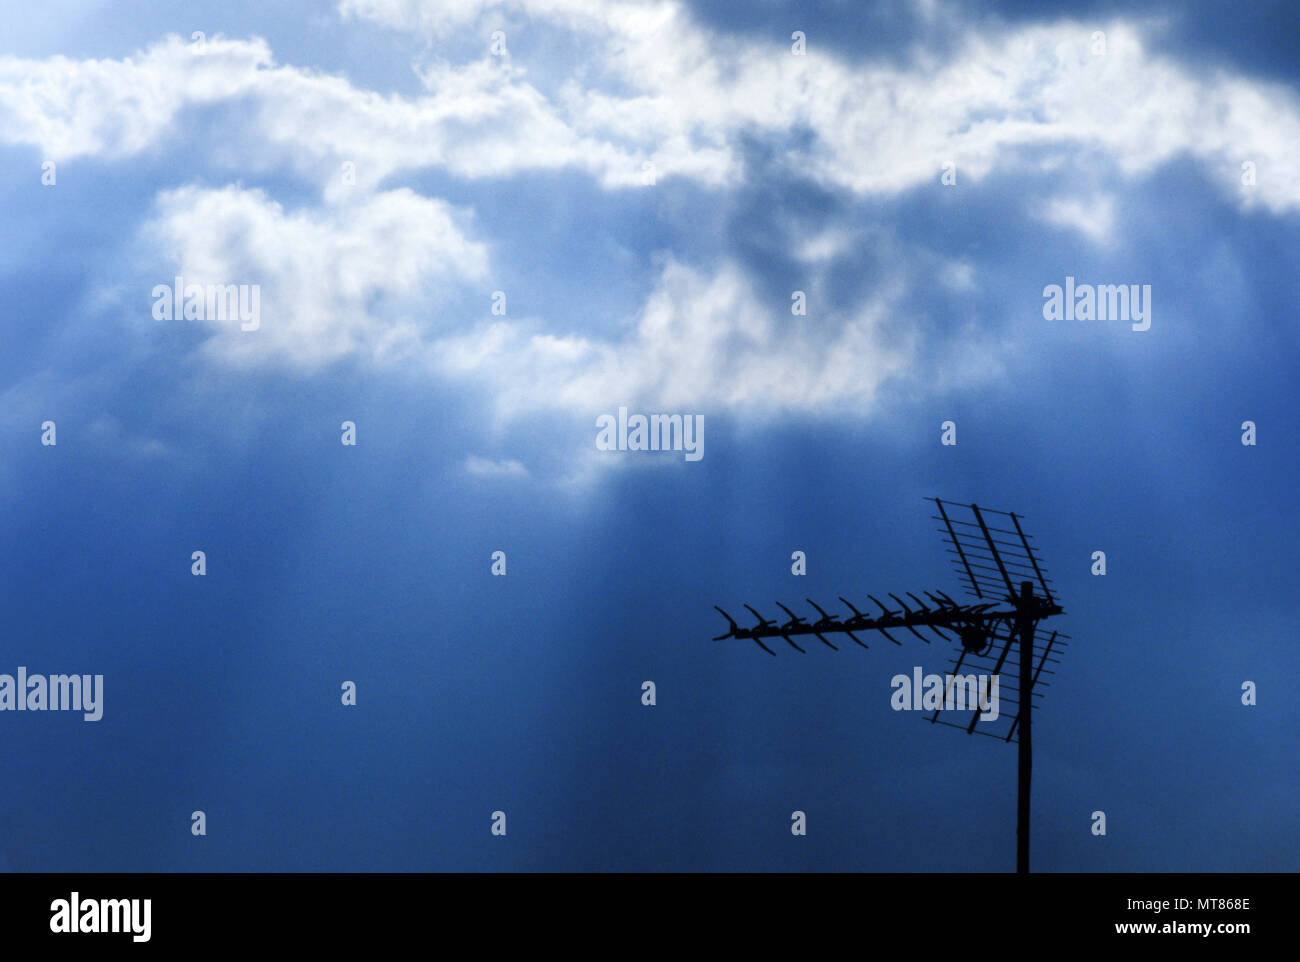 1988 HISTORICAL TELEVISION ANTENNAE UNDER STORMY SKY Stock Photo